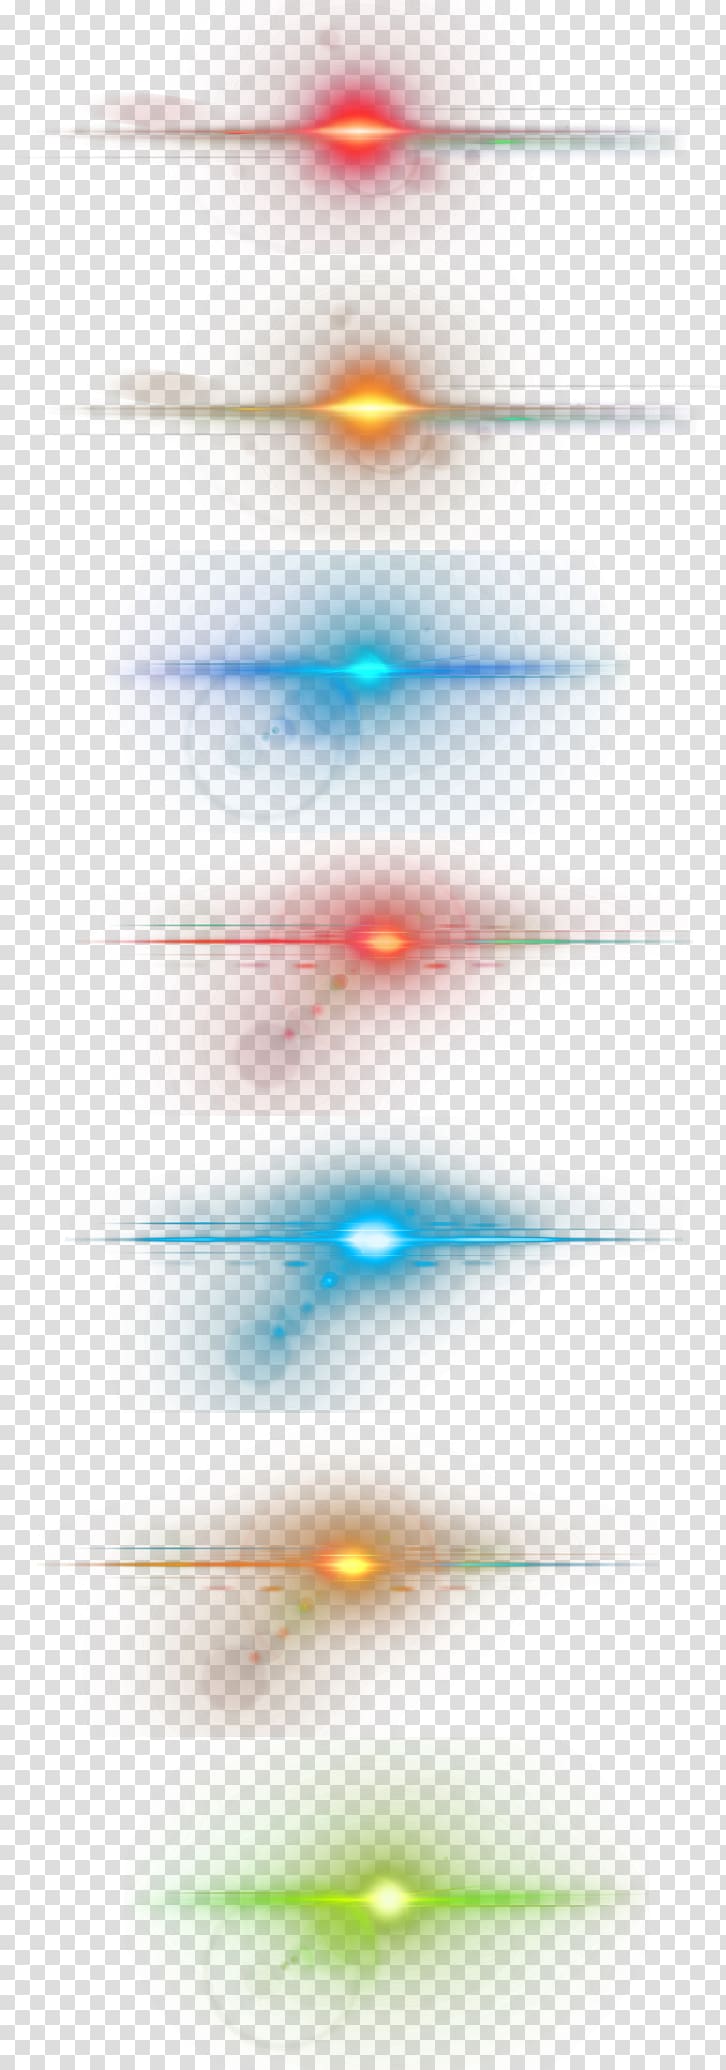 Lighting Star, Cool light effects, multicolored LED lights transparent background PNG clipart